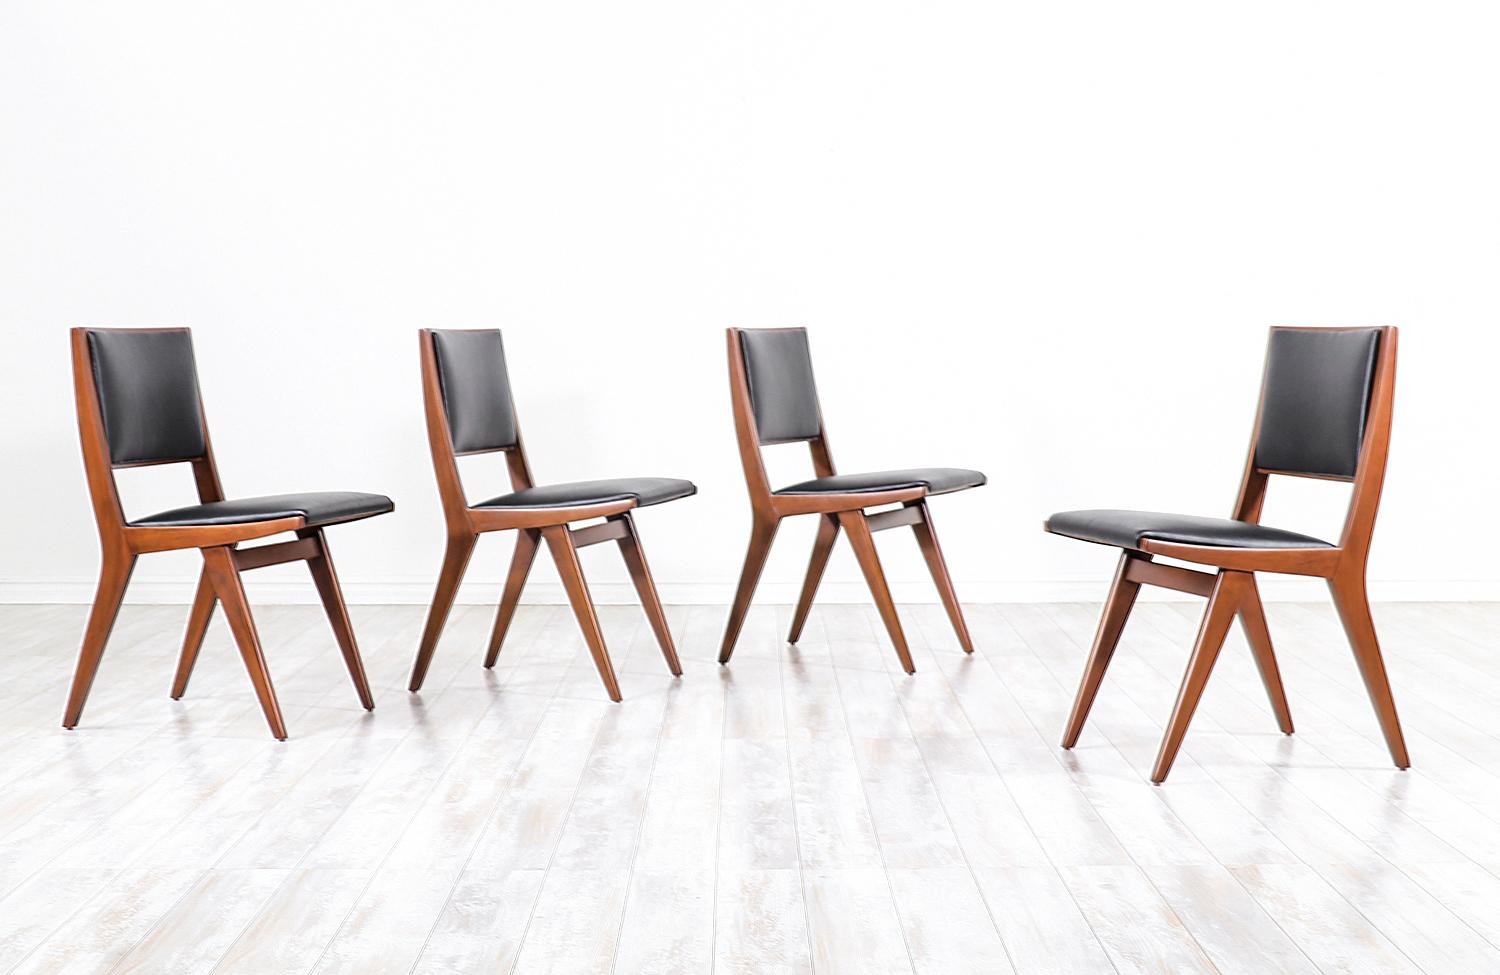 A stylish set of four modern dining chairs designed by Dan Johnson for Hayden Hall Furniture in the United States, circa 1940s. This rare and sleek dining set features sturdy walnut-stained beech-wood frames with new high-density foam and top grain